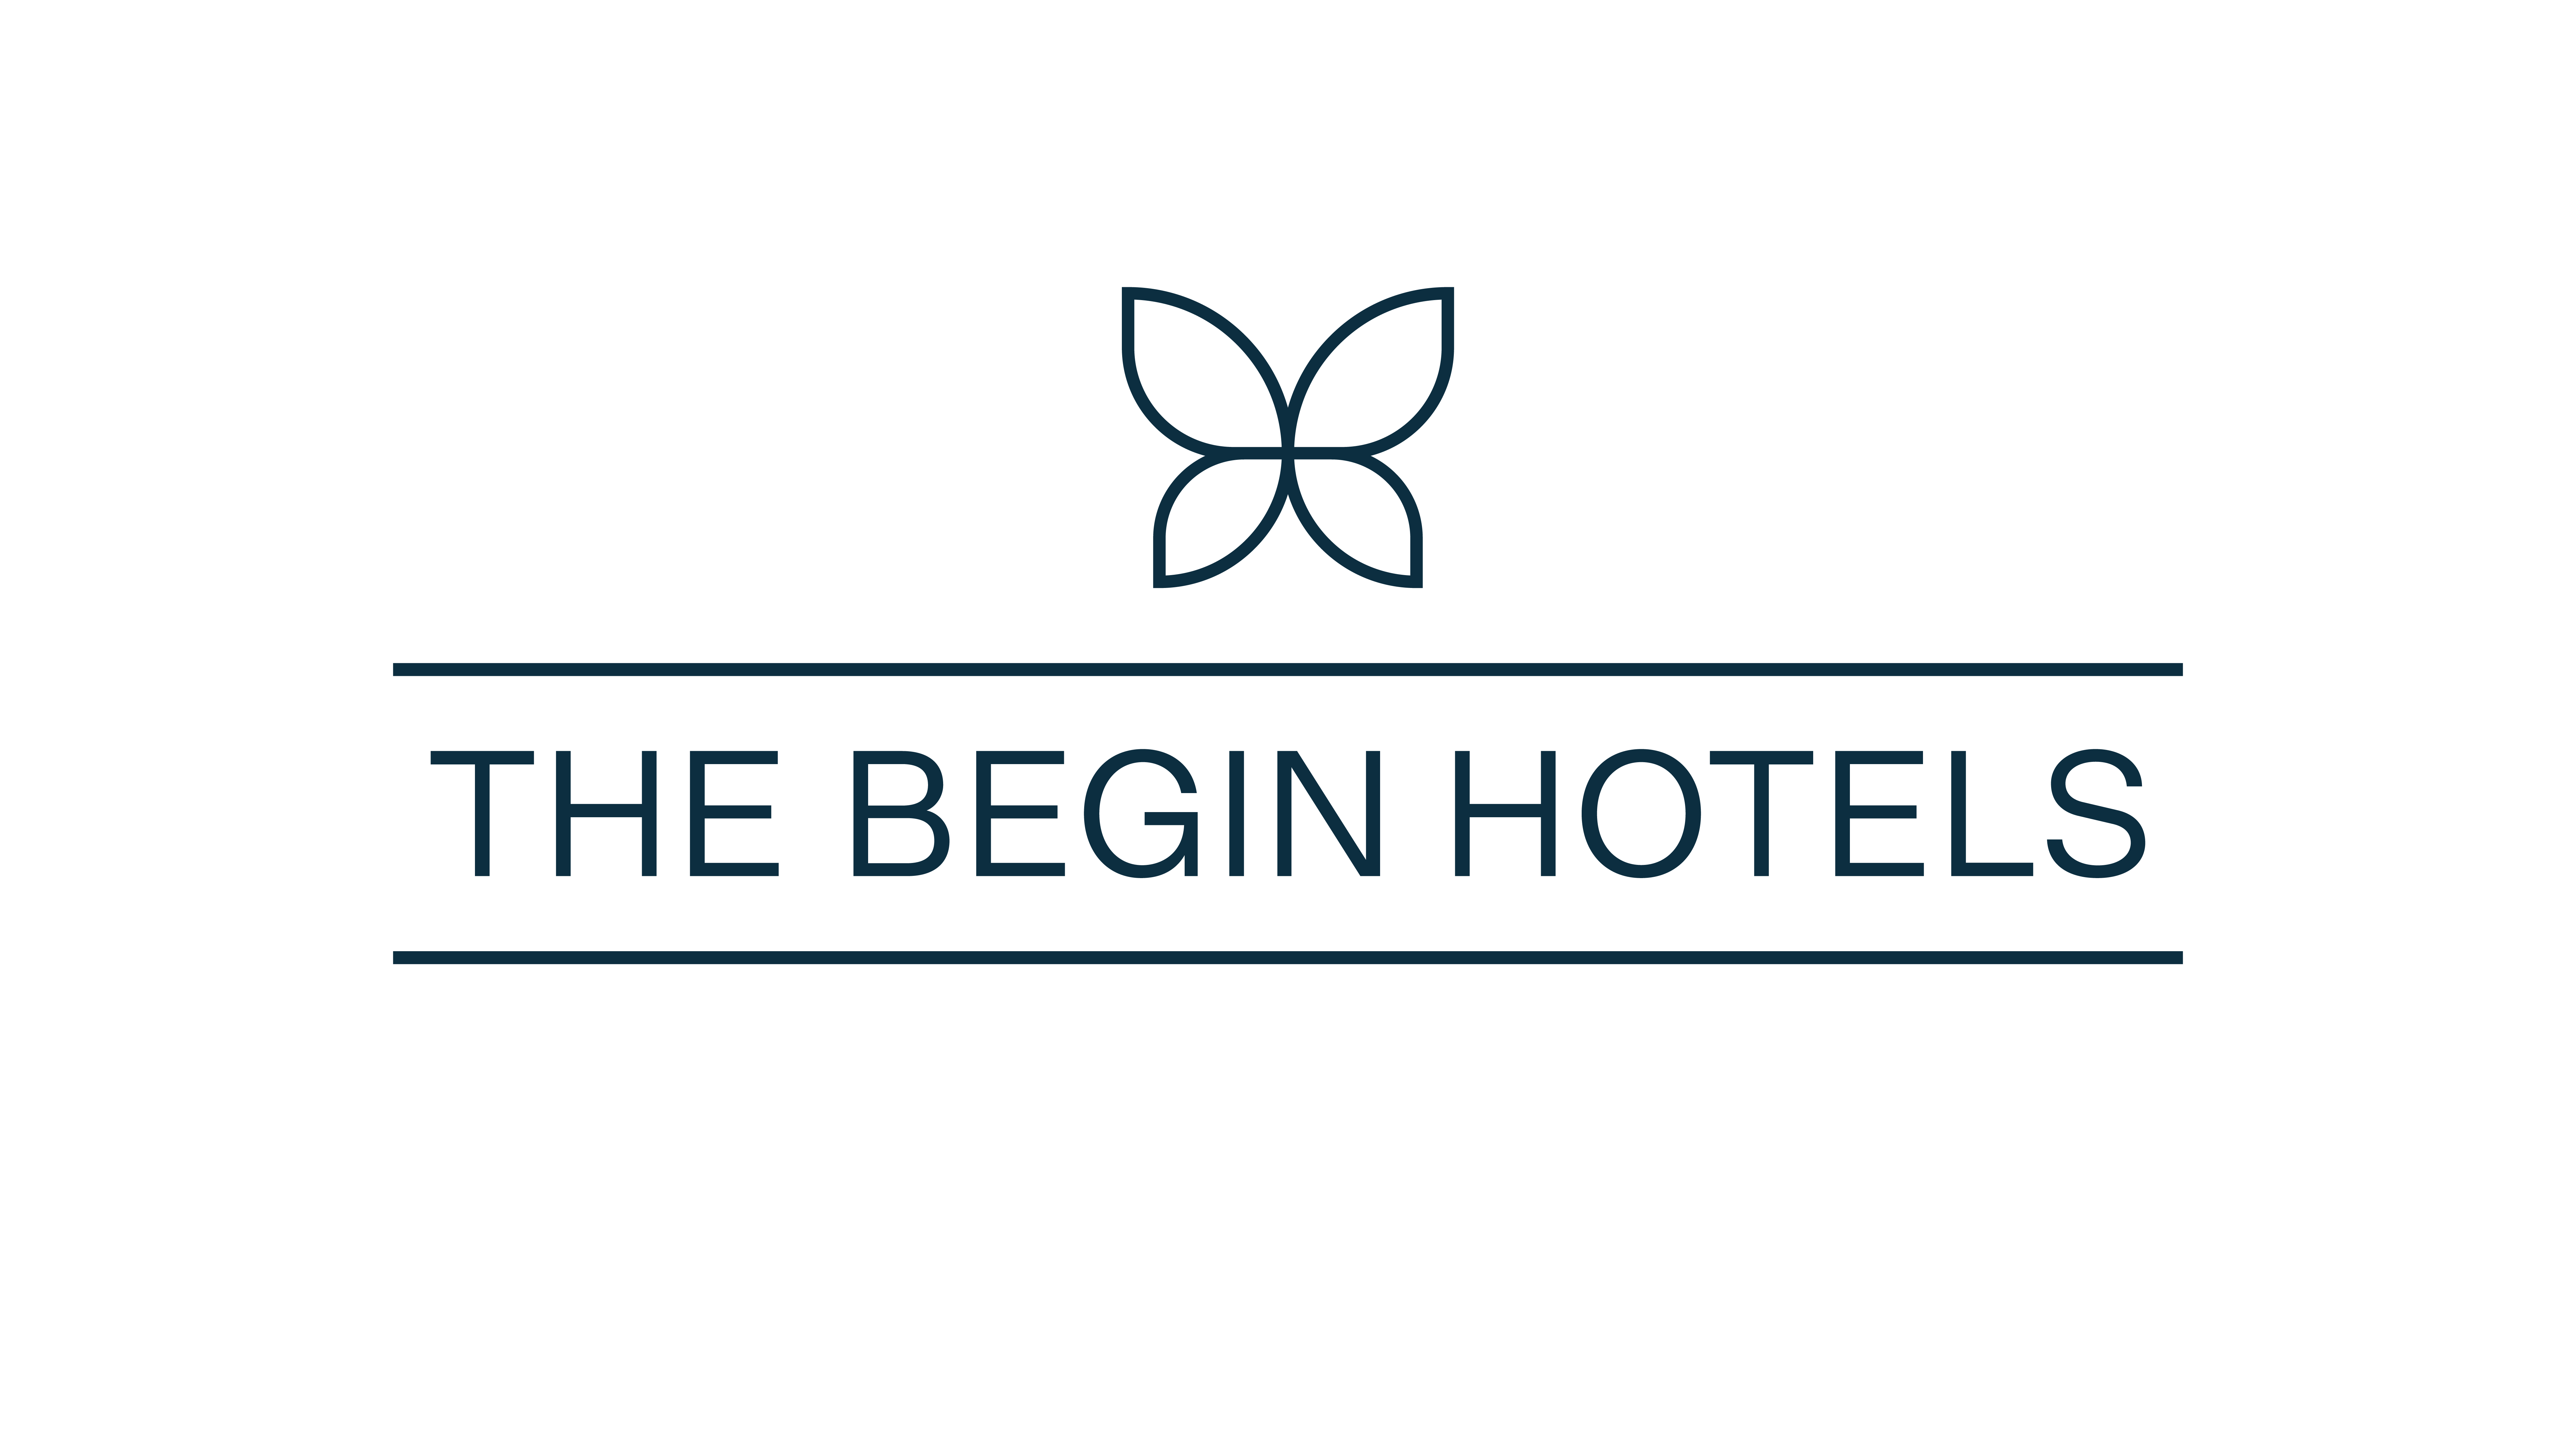 The Begin Hotels: The Place to be | Boutique Hotels e Resorts